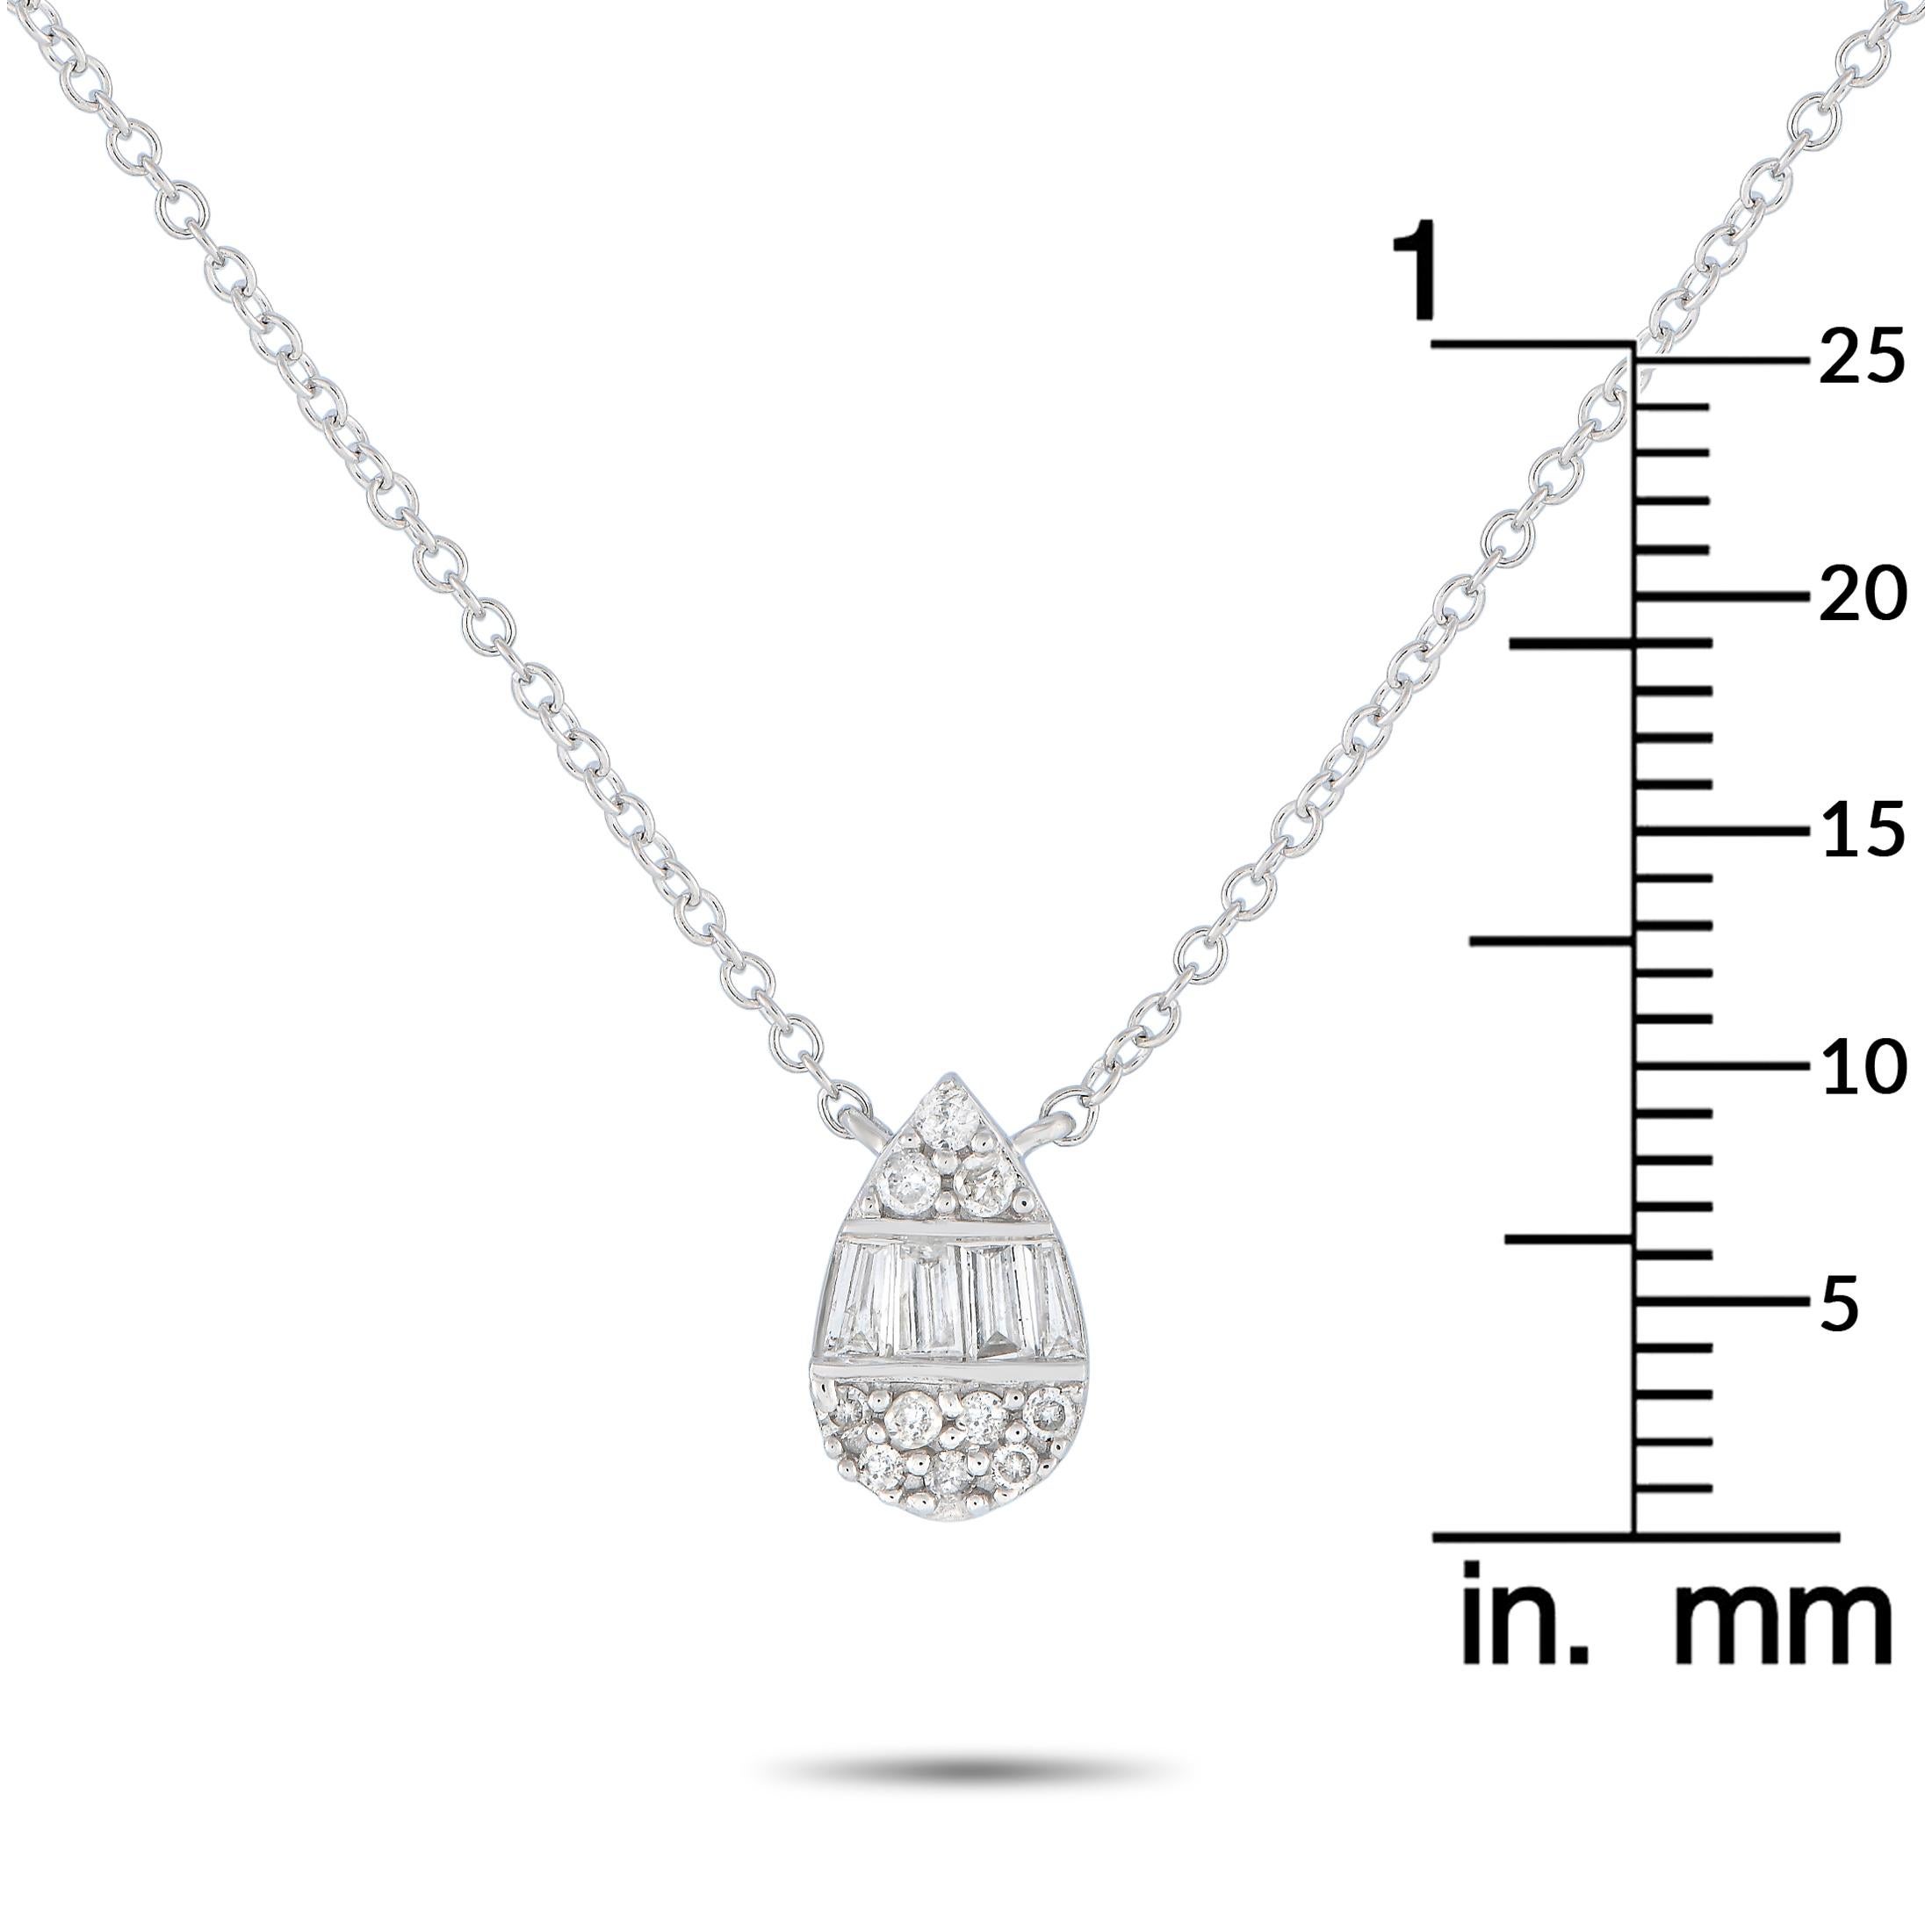 14K White Gold 0.15ct Diamond Pear Necklace PN15162-W In New Condition For Sale In Southampton, PA